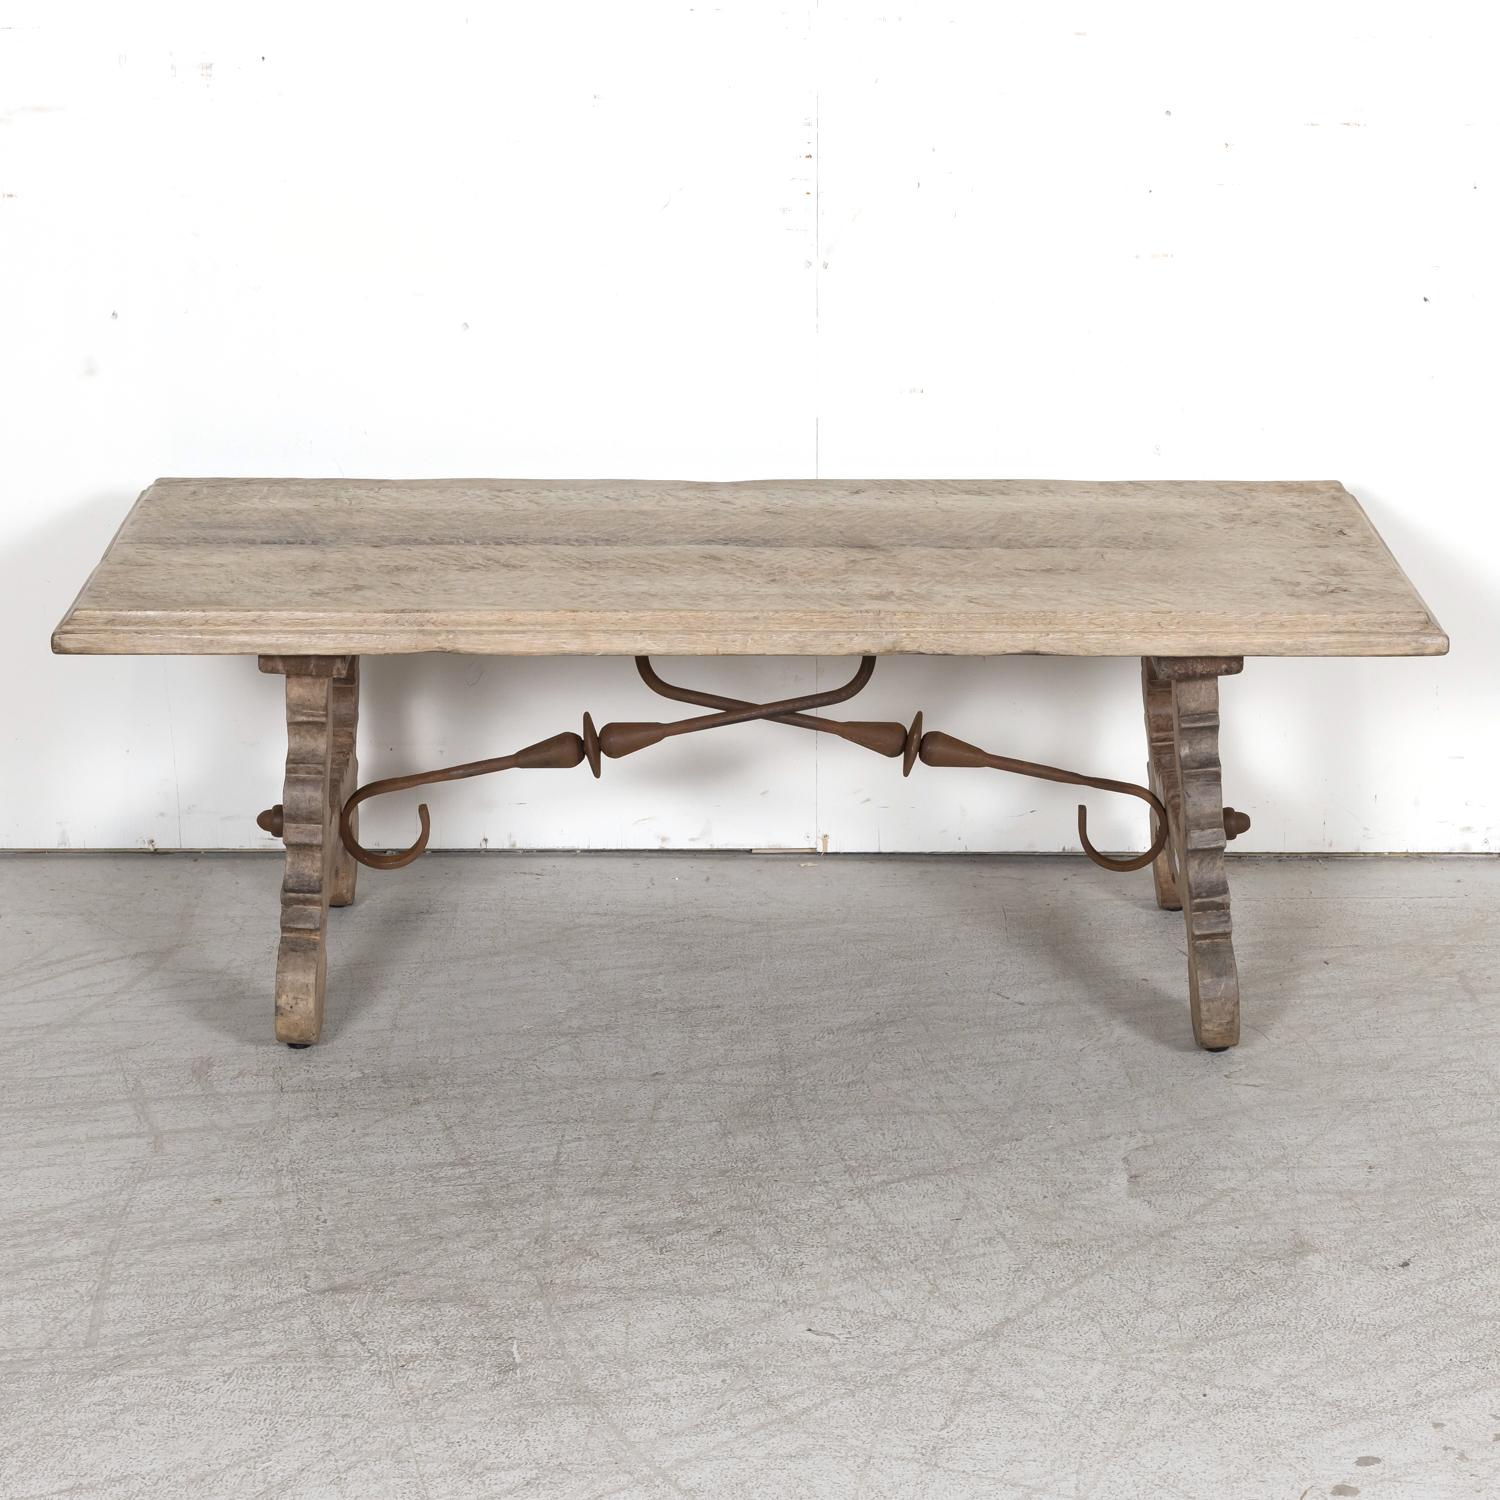 19th Century Spanish Baroque Style Bleached Oak Coffee Table with Iron Stretcher For Sale 12